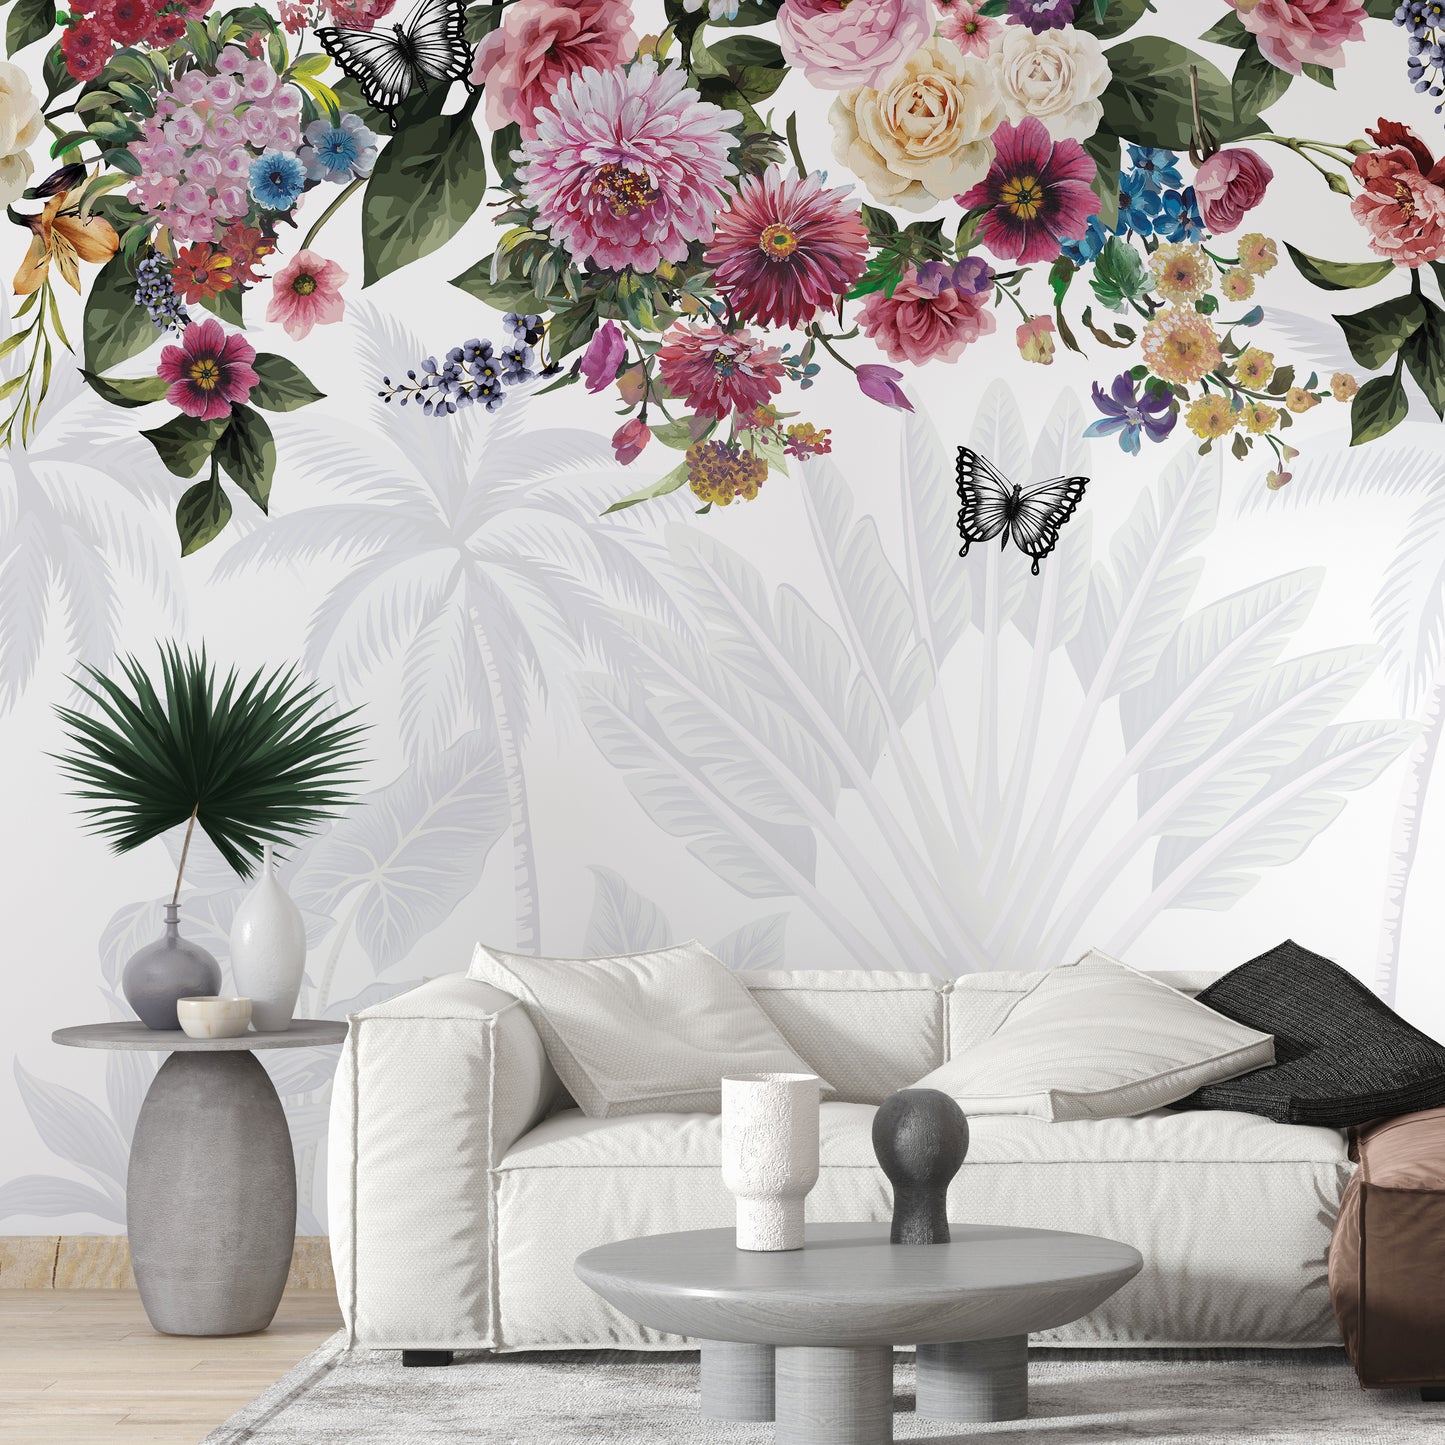 Melli Mello High on love light white photowall wallpaper floral jungle bombastic colorful bold deco eyecatcher be different living room deco 